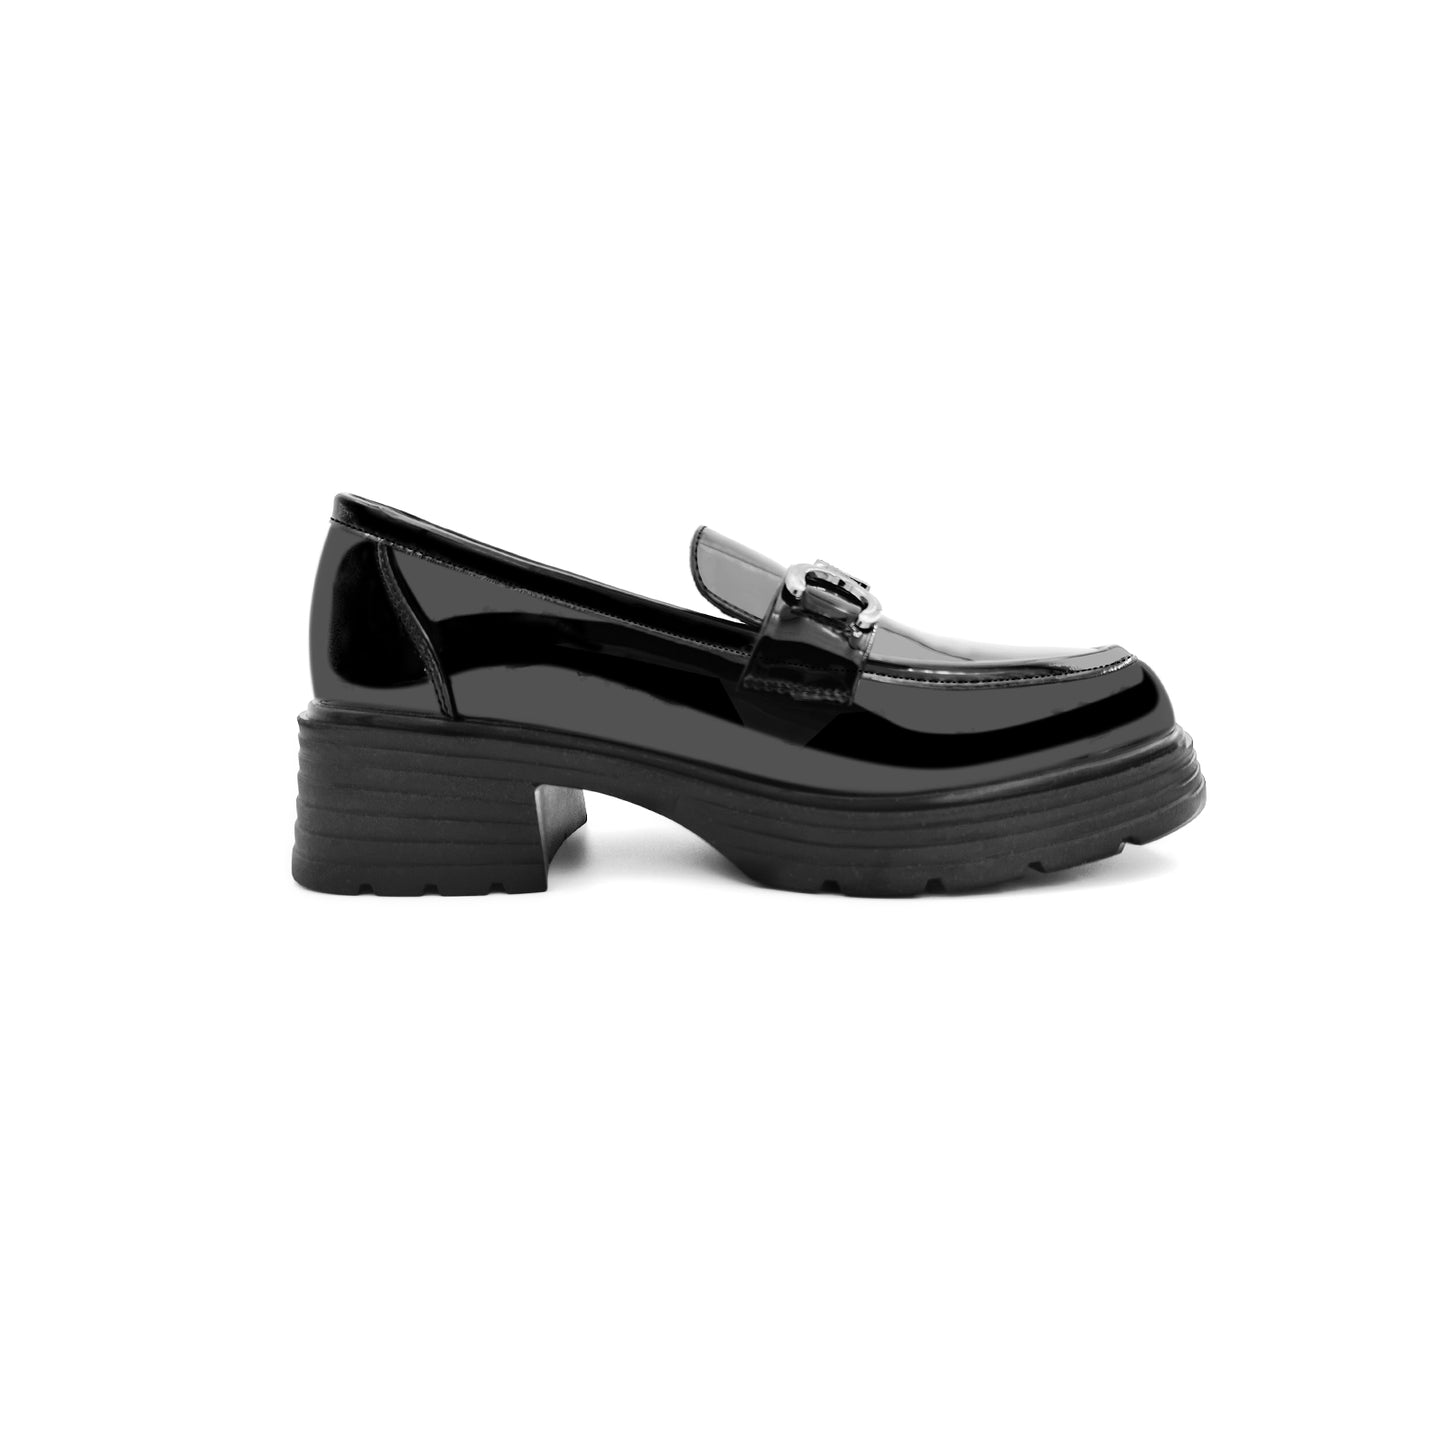 Elizabethlike Women's Thick-Soled Loafer in Patent Leather with Silver Metal Buckle